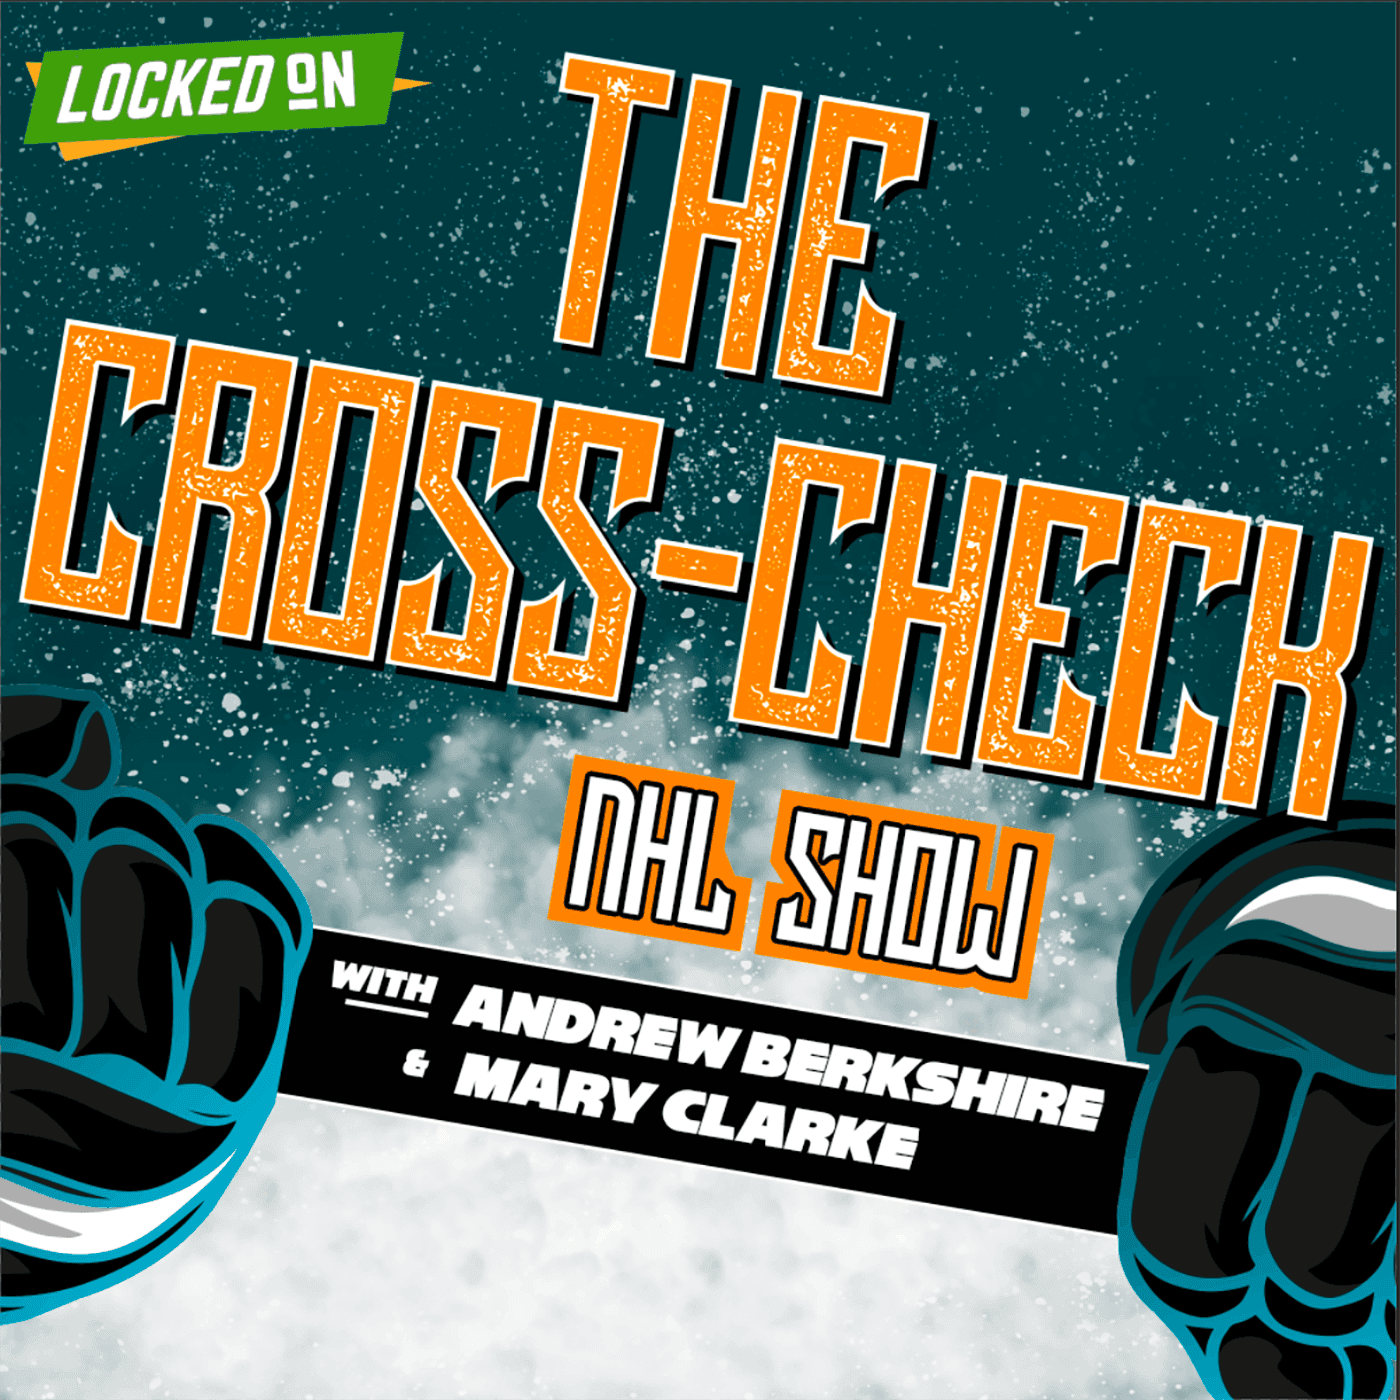 Show poster of The Cross-Check NHL Show